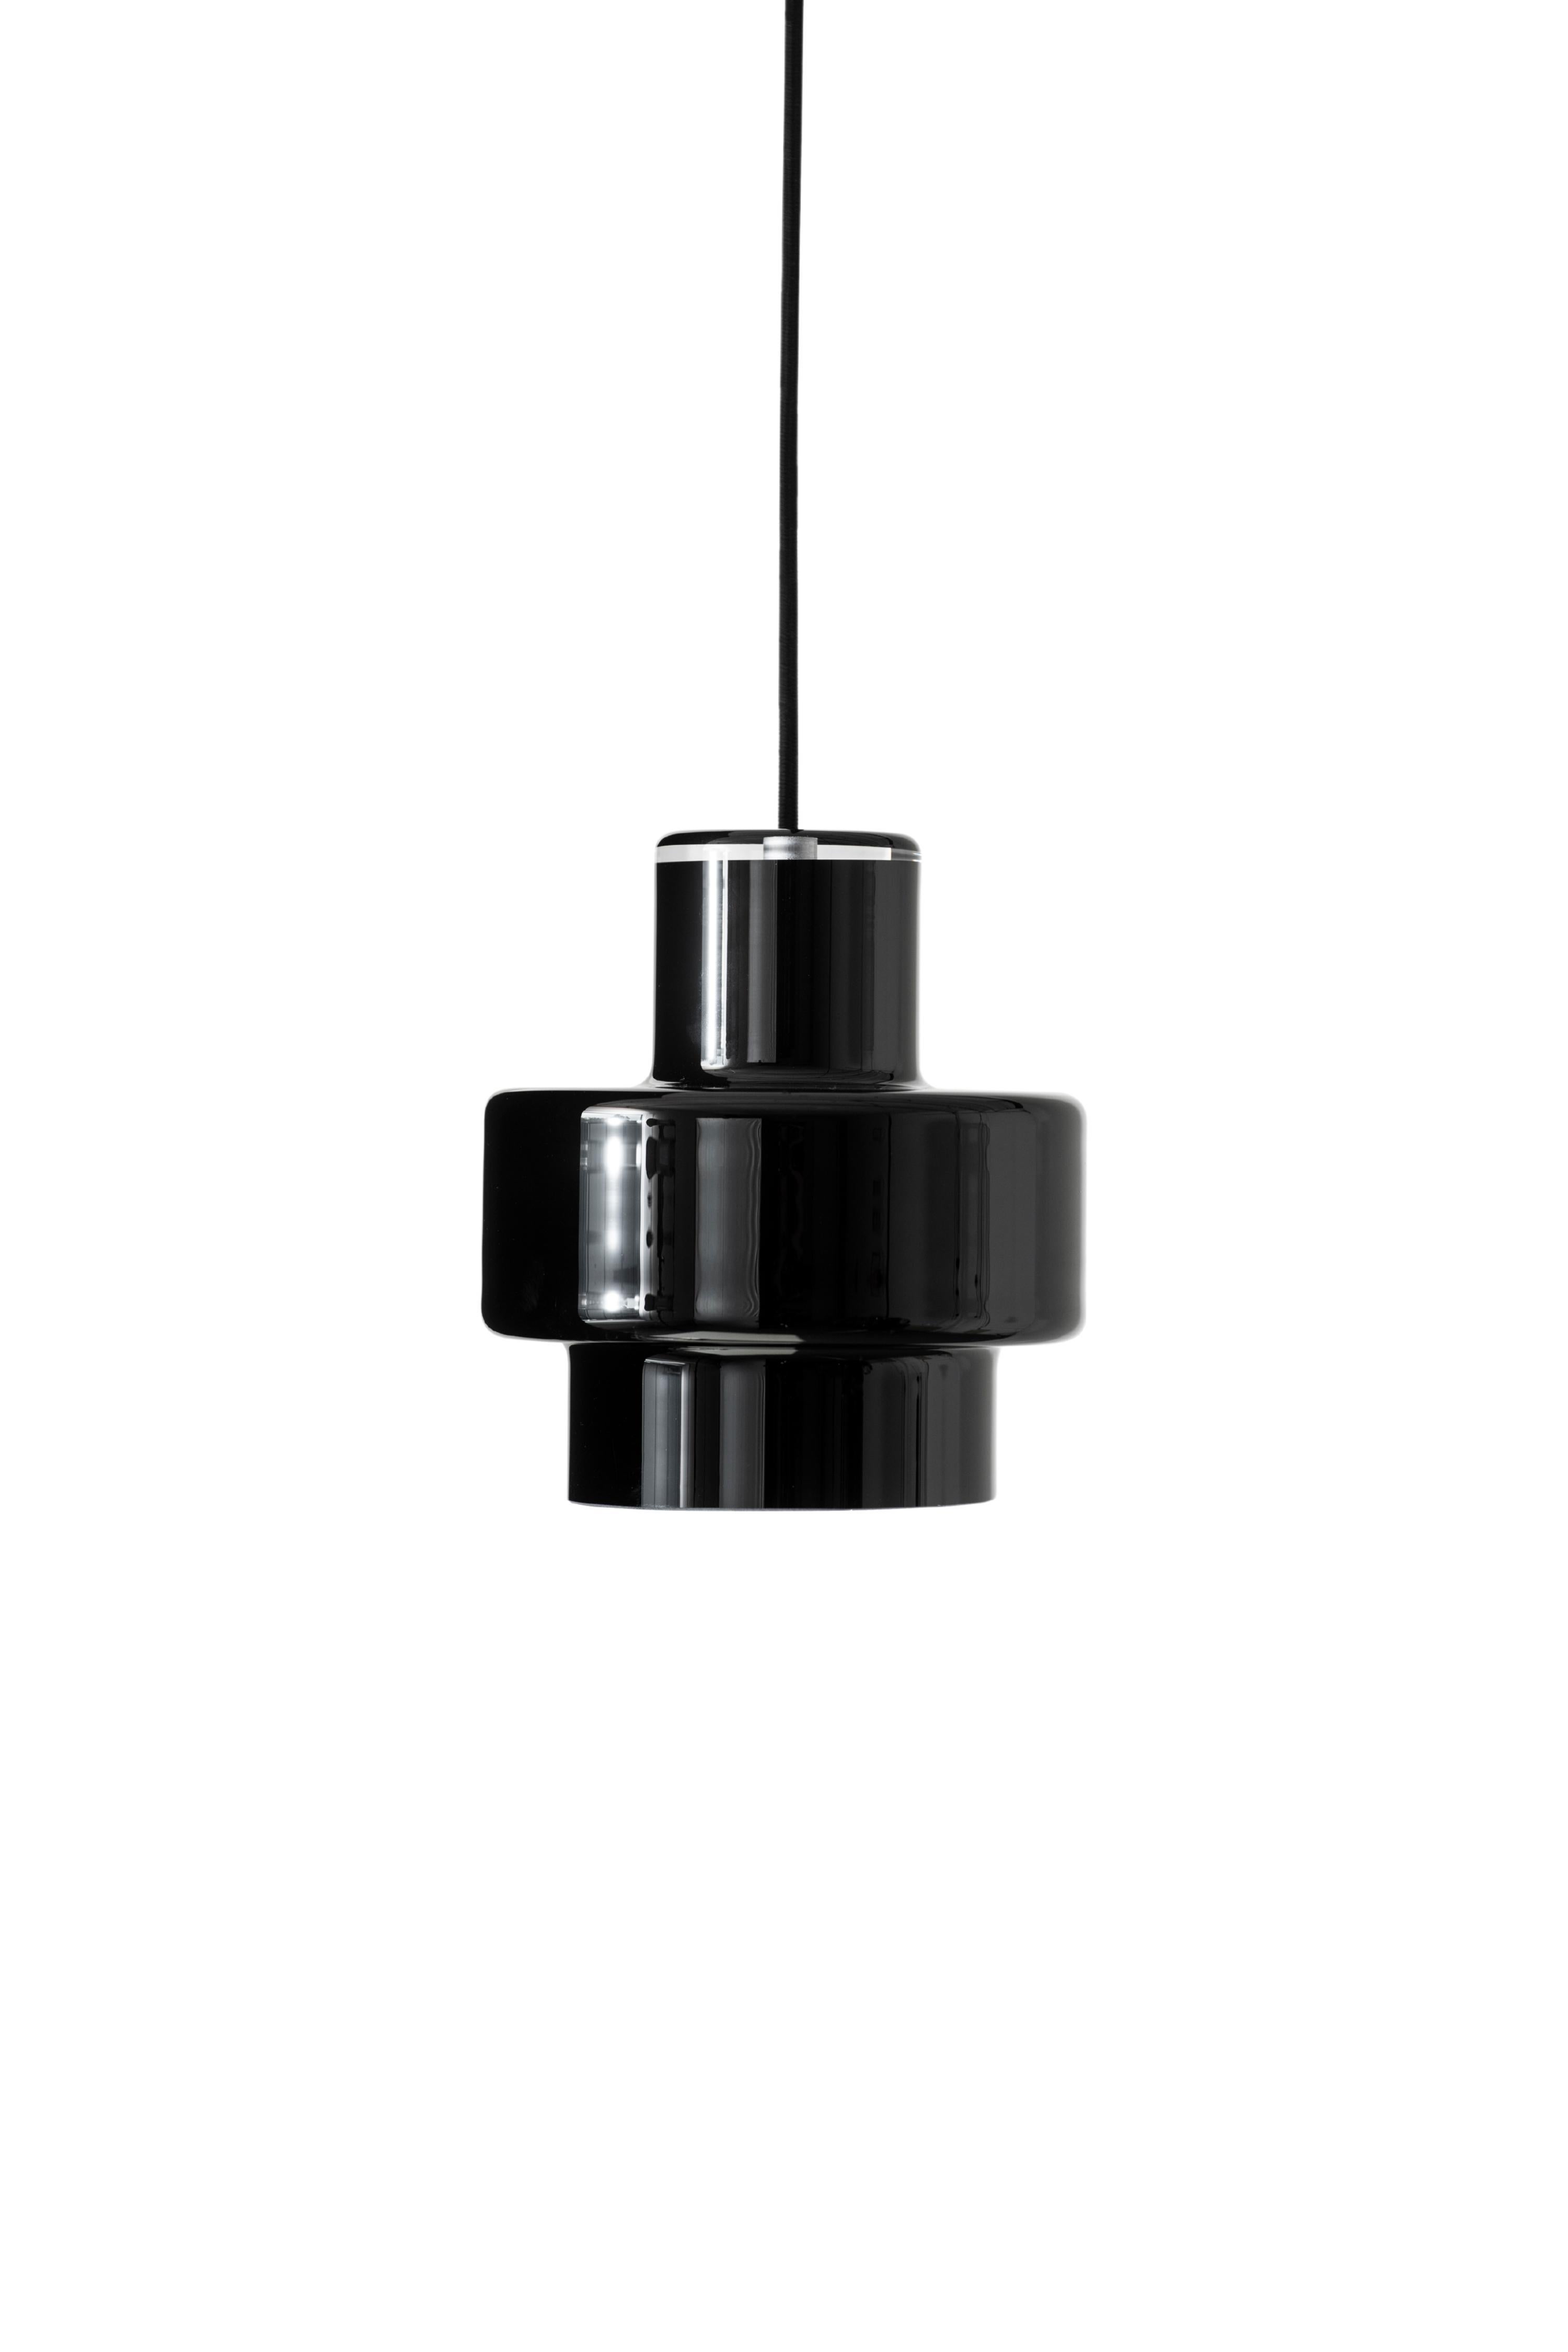 'Multi M' glass pendant by Jokinen and Konu for Innolux. The award winning Multi glass collection is based on an artistically innovative form of modular glass blowing mold developed by the internationally acclaimed Finnish design team of Jukka